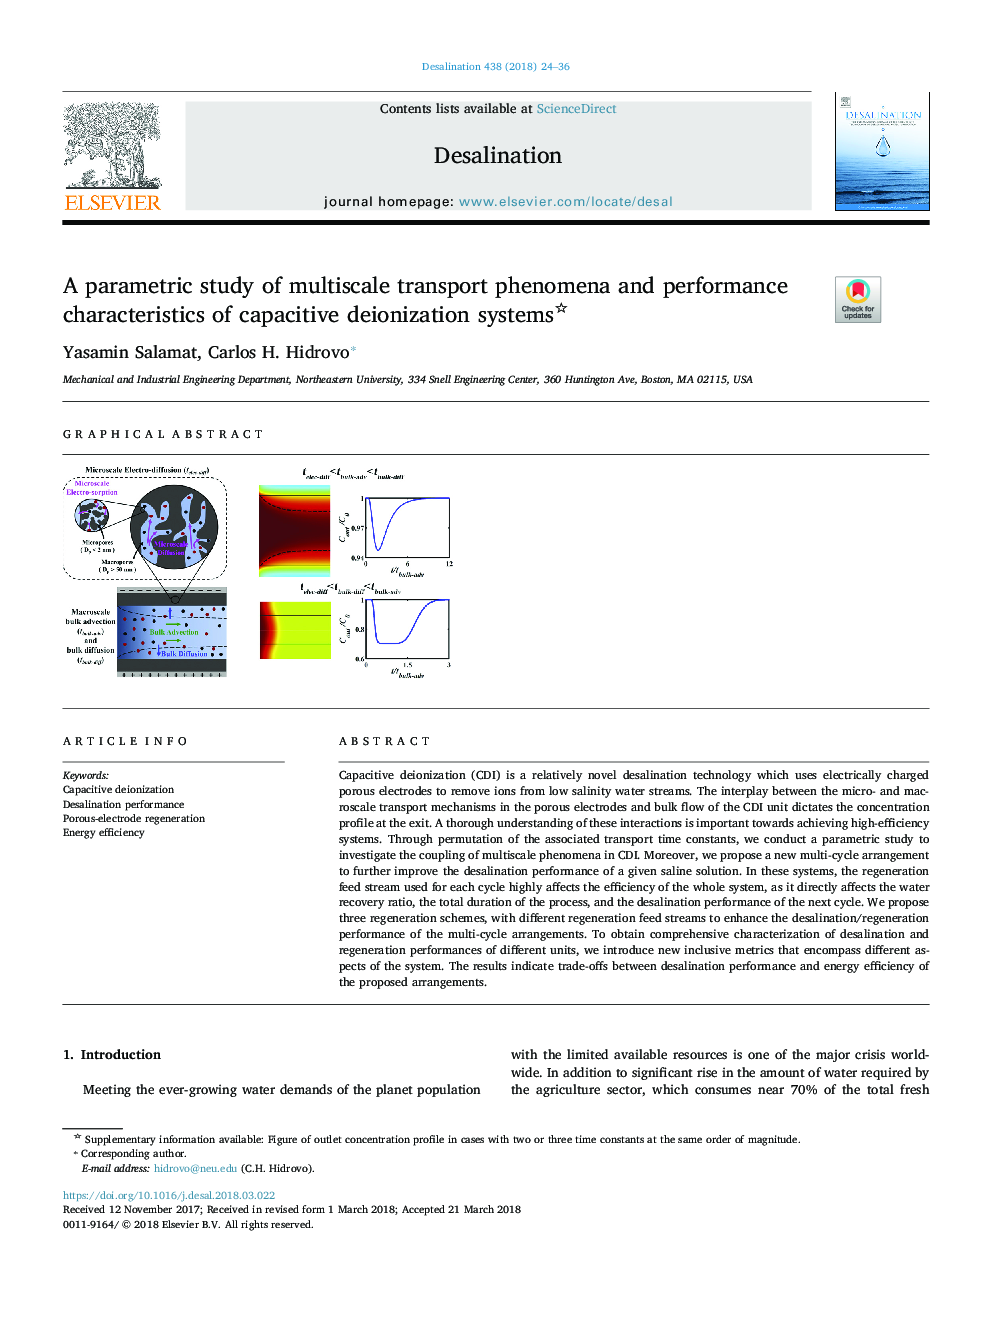 A parametric study of multiscale transport phenomena and performance characteristics of capacitive deionization systems